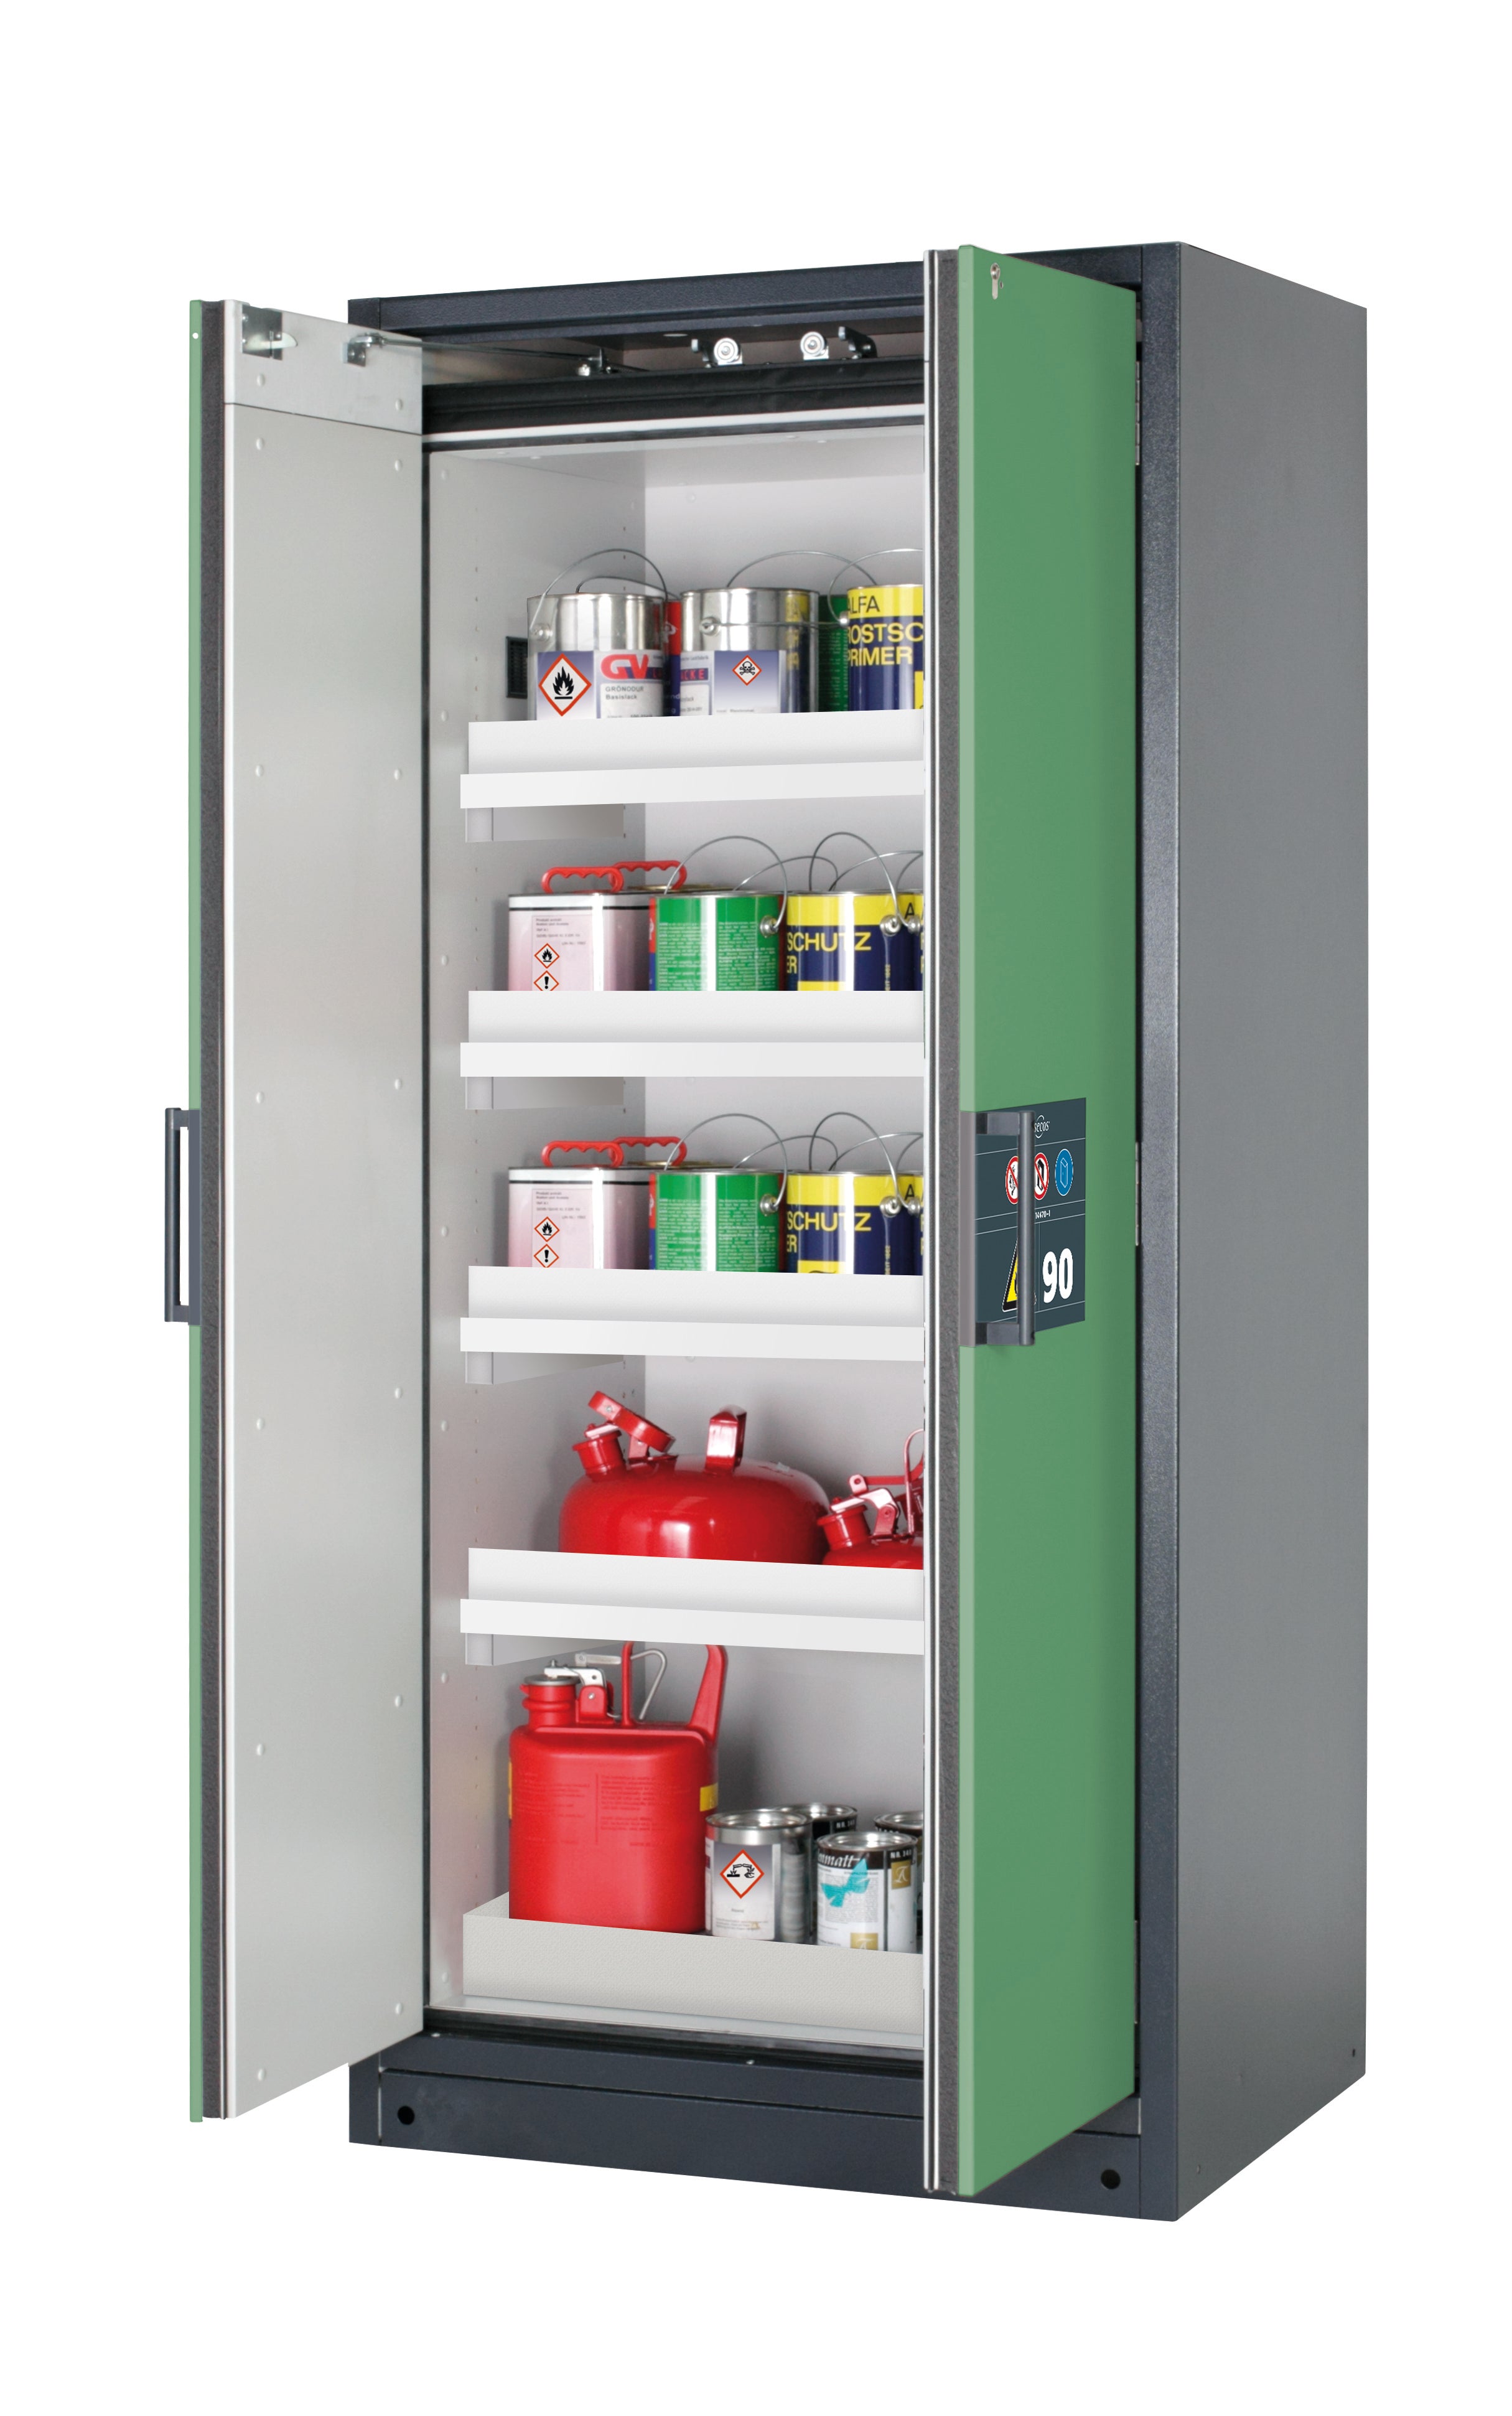 Type 90 safety storage cabinet Q-CLASSIC-90 model Q90.195.090 in reseda green RAL 6011 with 4x tray shelf (standard) (polypropylene),